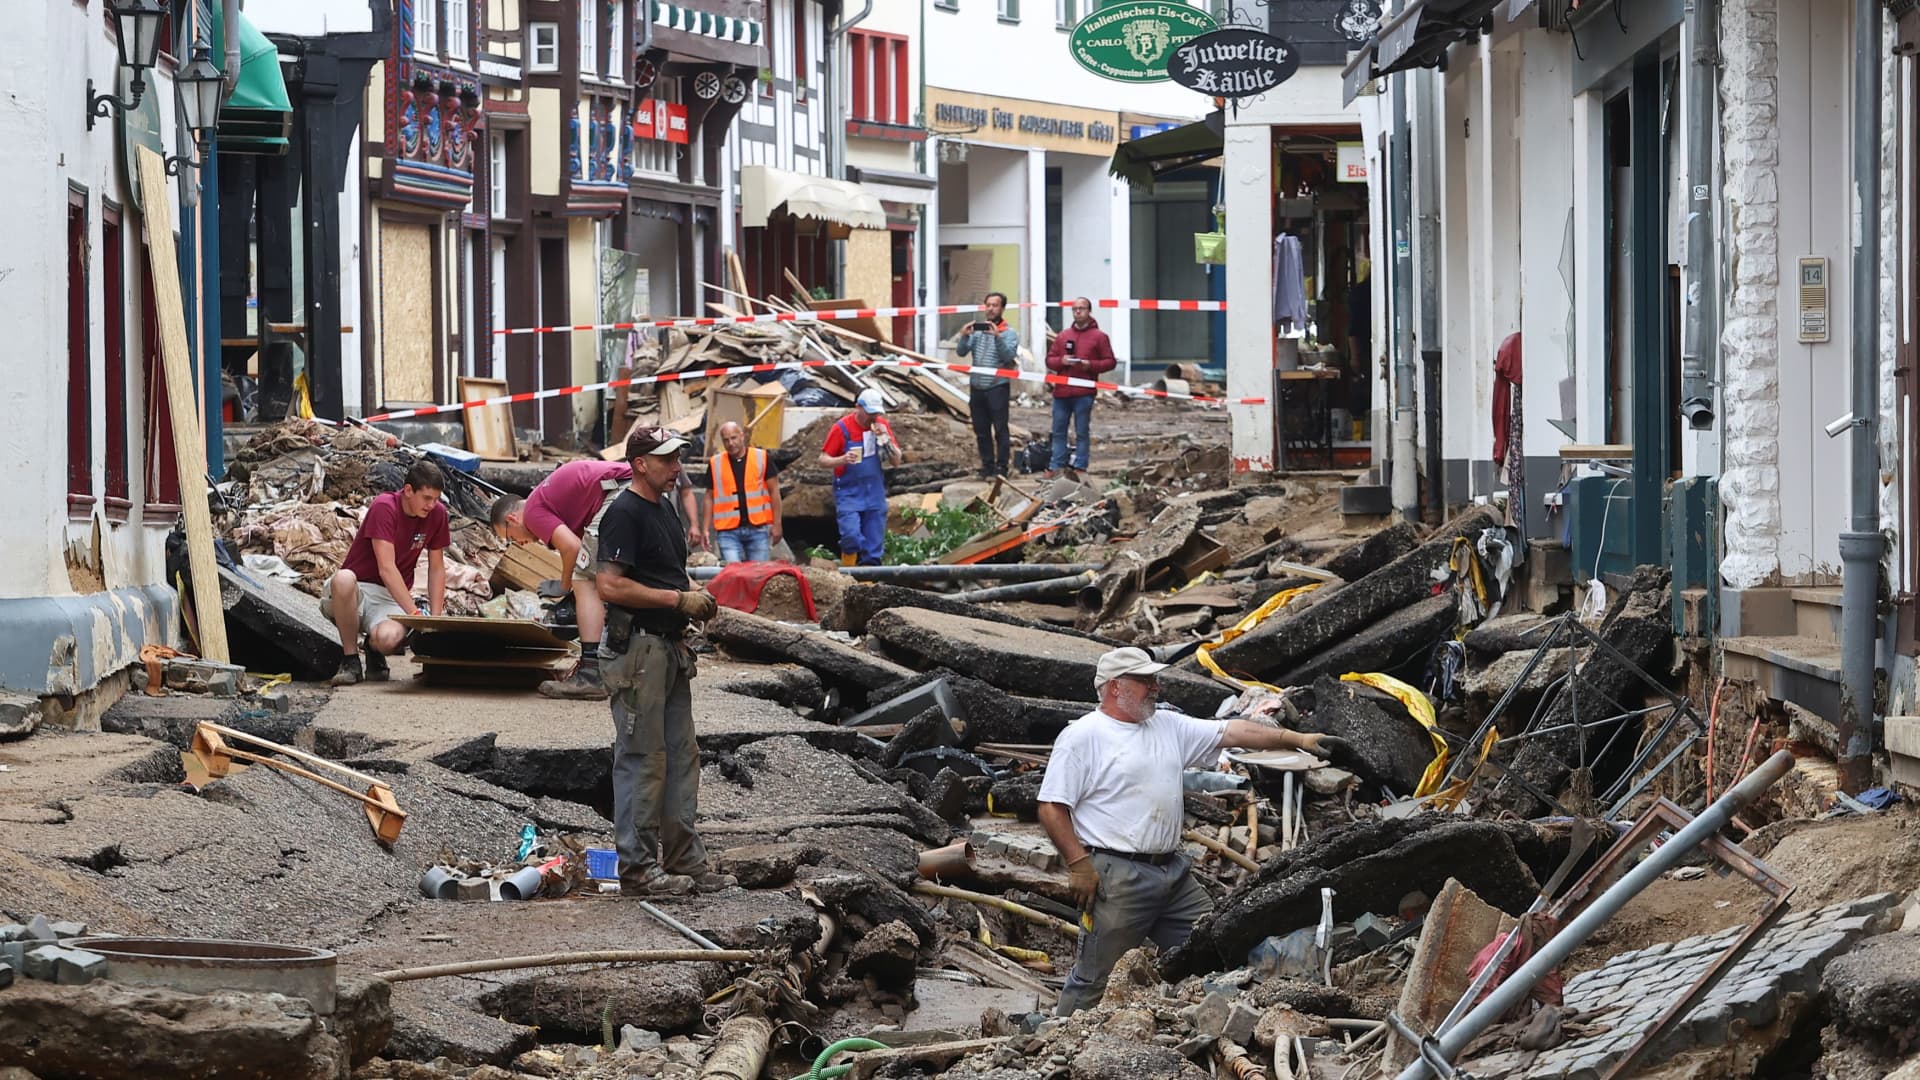 People are seen in an area affected by floods caused by heavy rainfalls in Bad Muenstereifel, Germany, July 19, 2021.